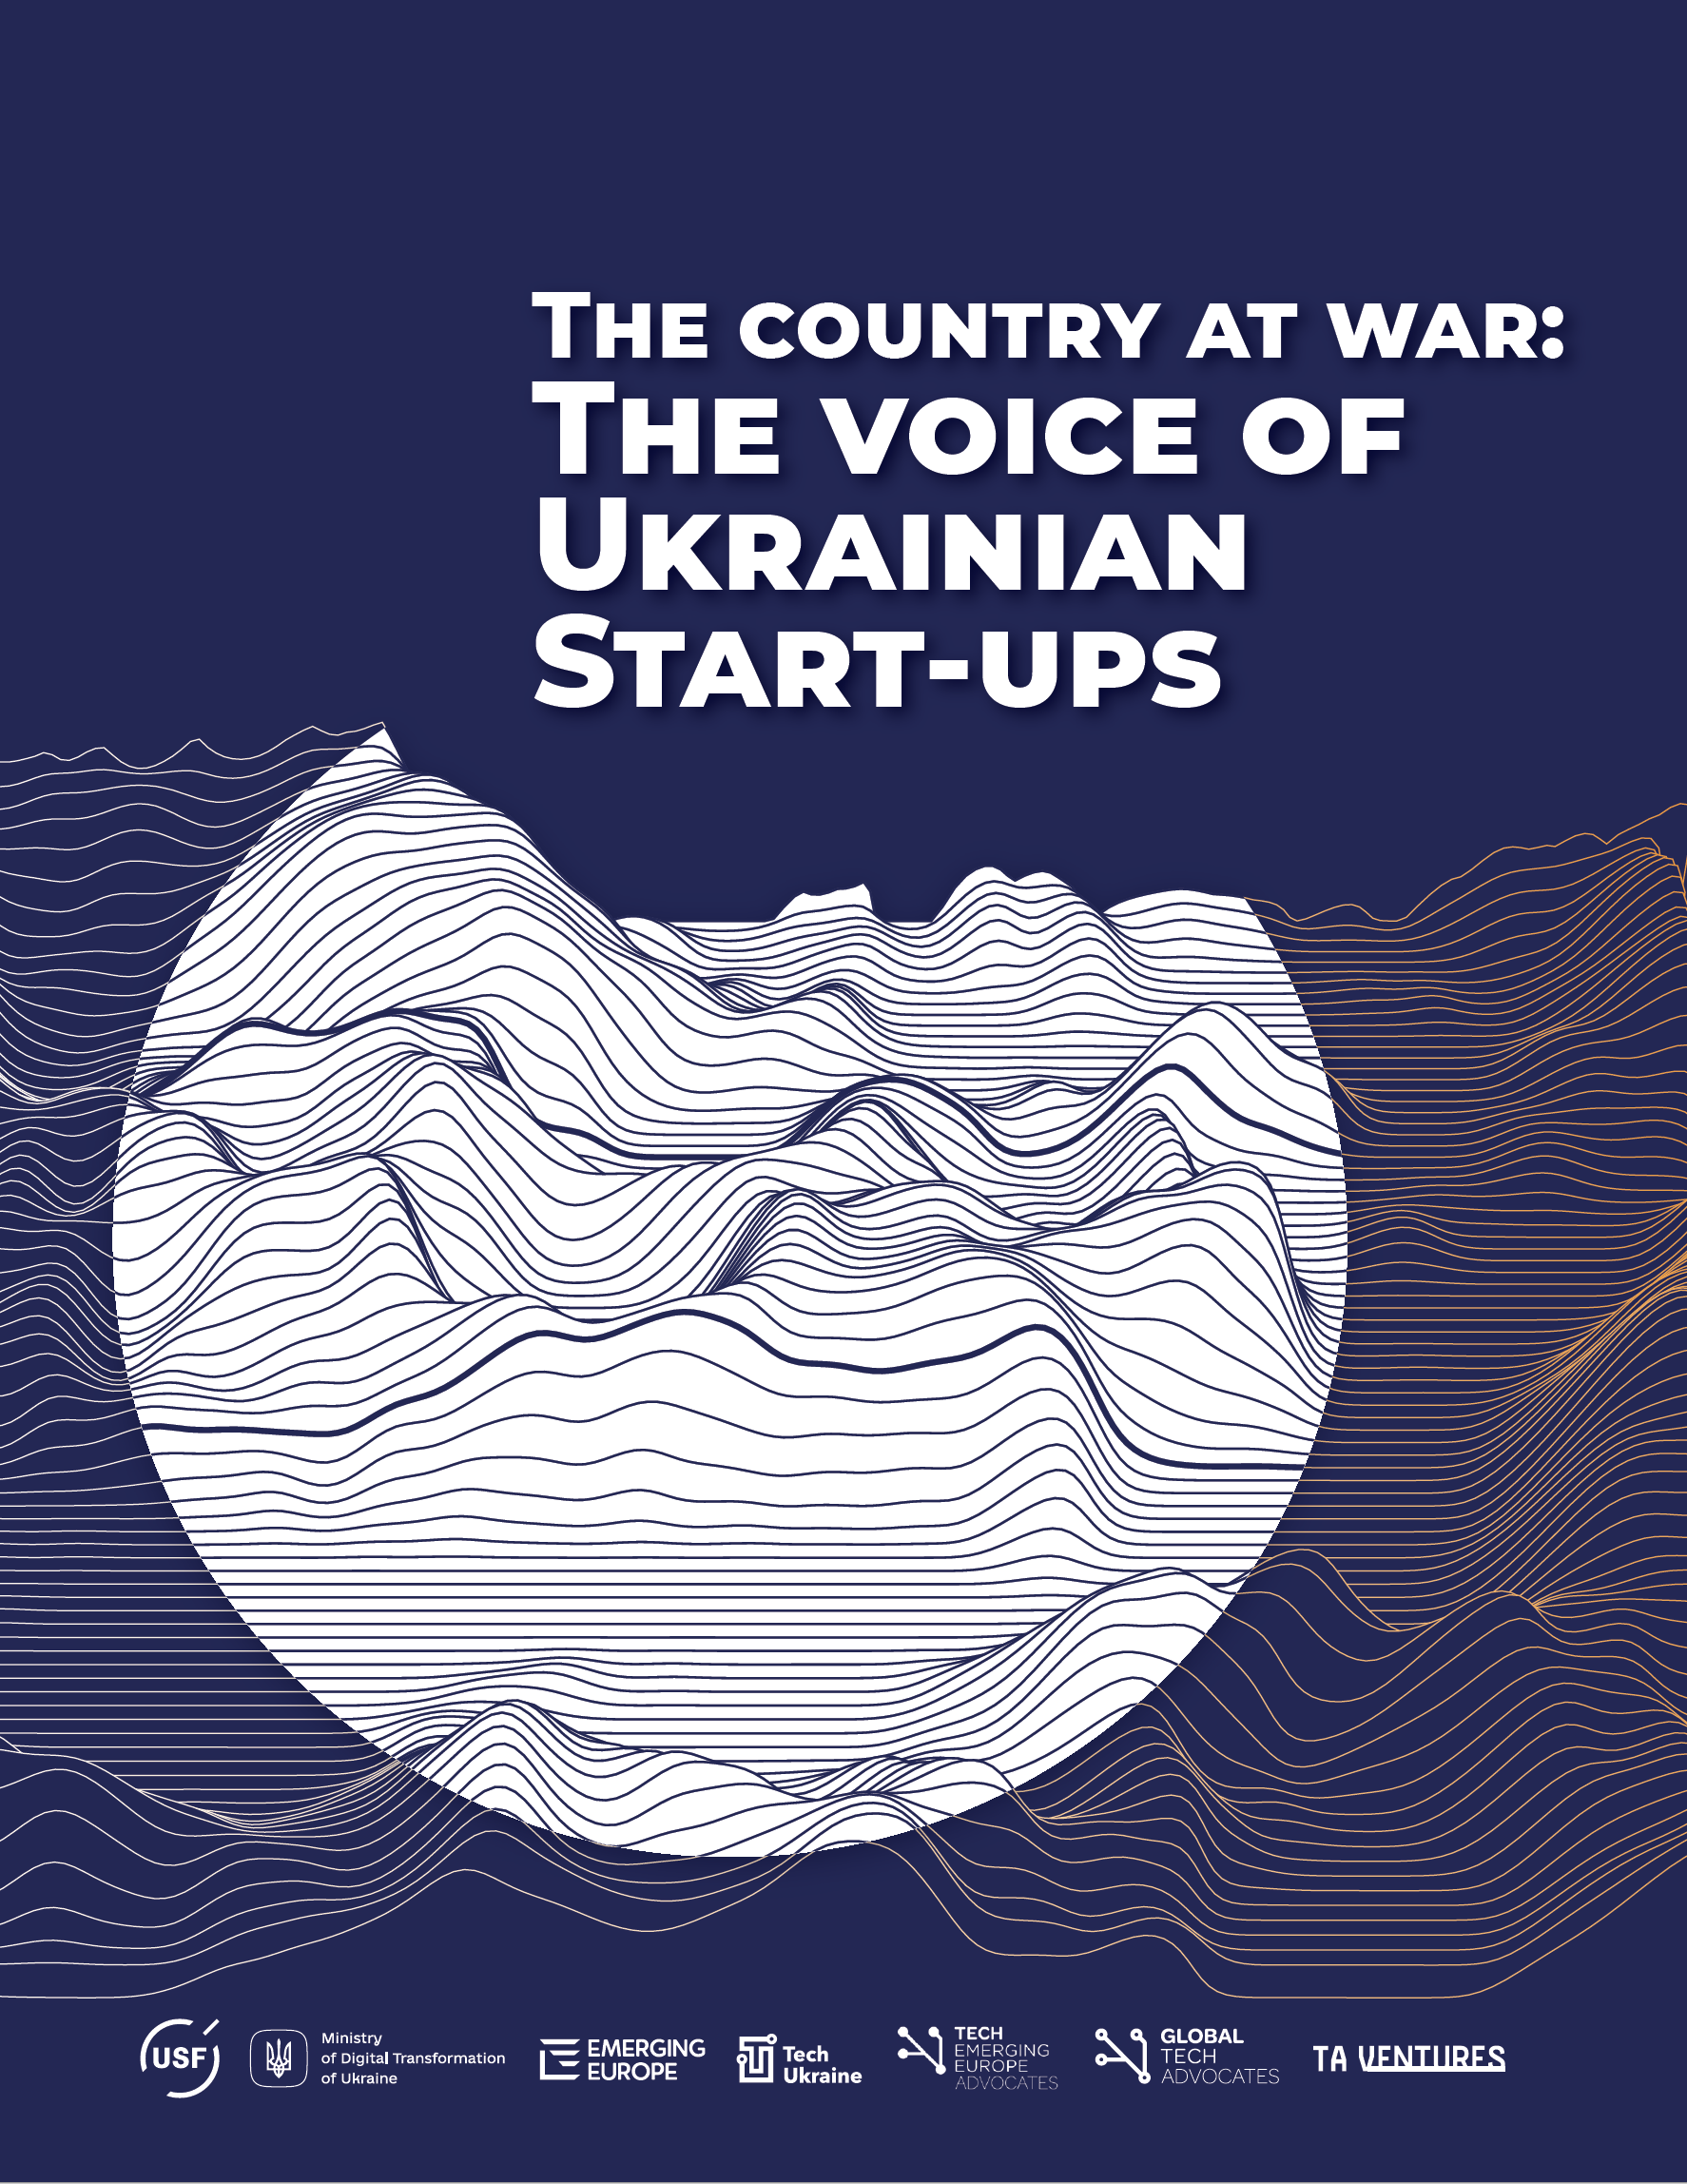 The Country at War: The Voice of Ukrainian Start-ups 2022